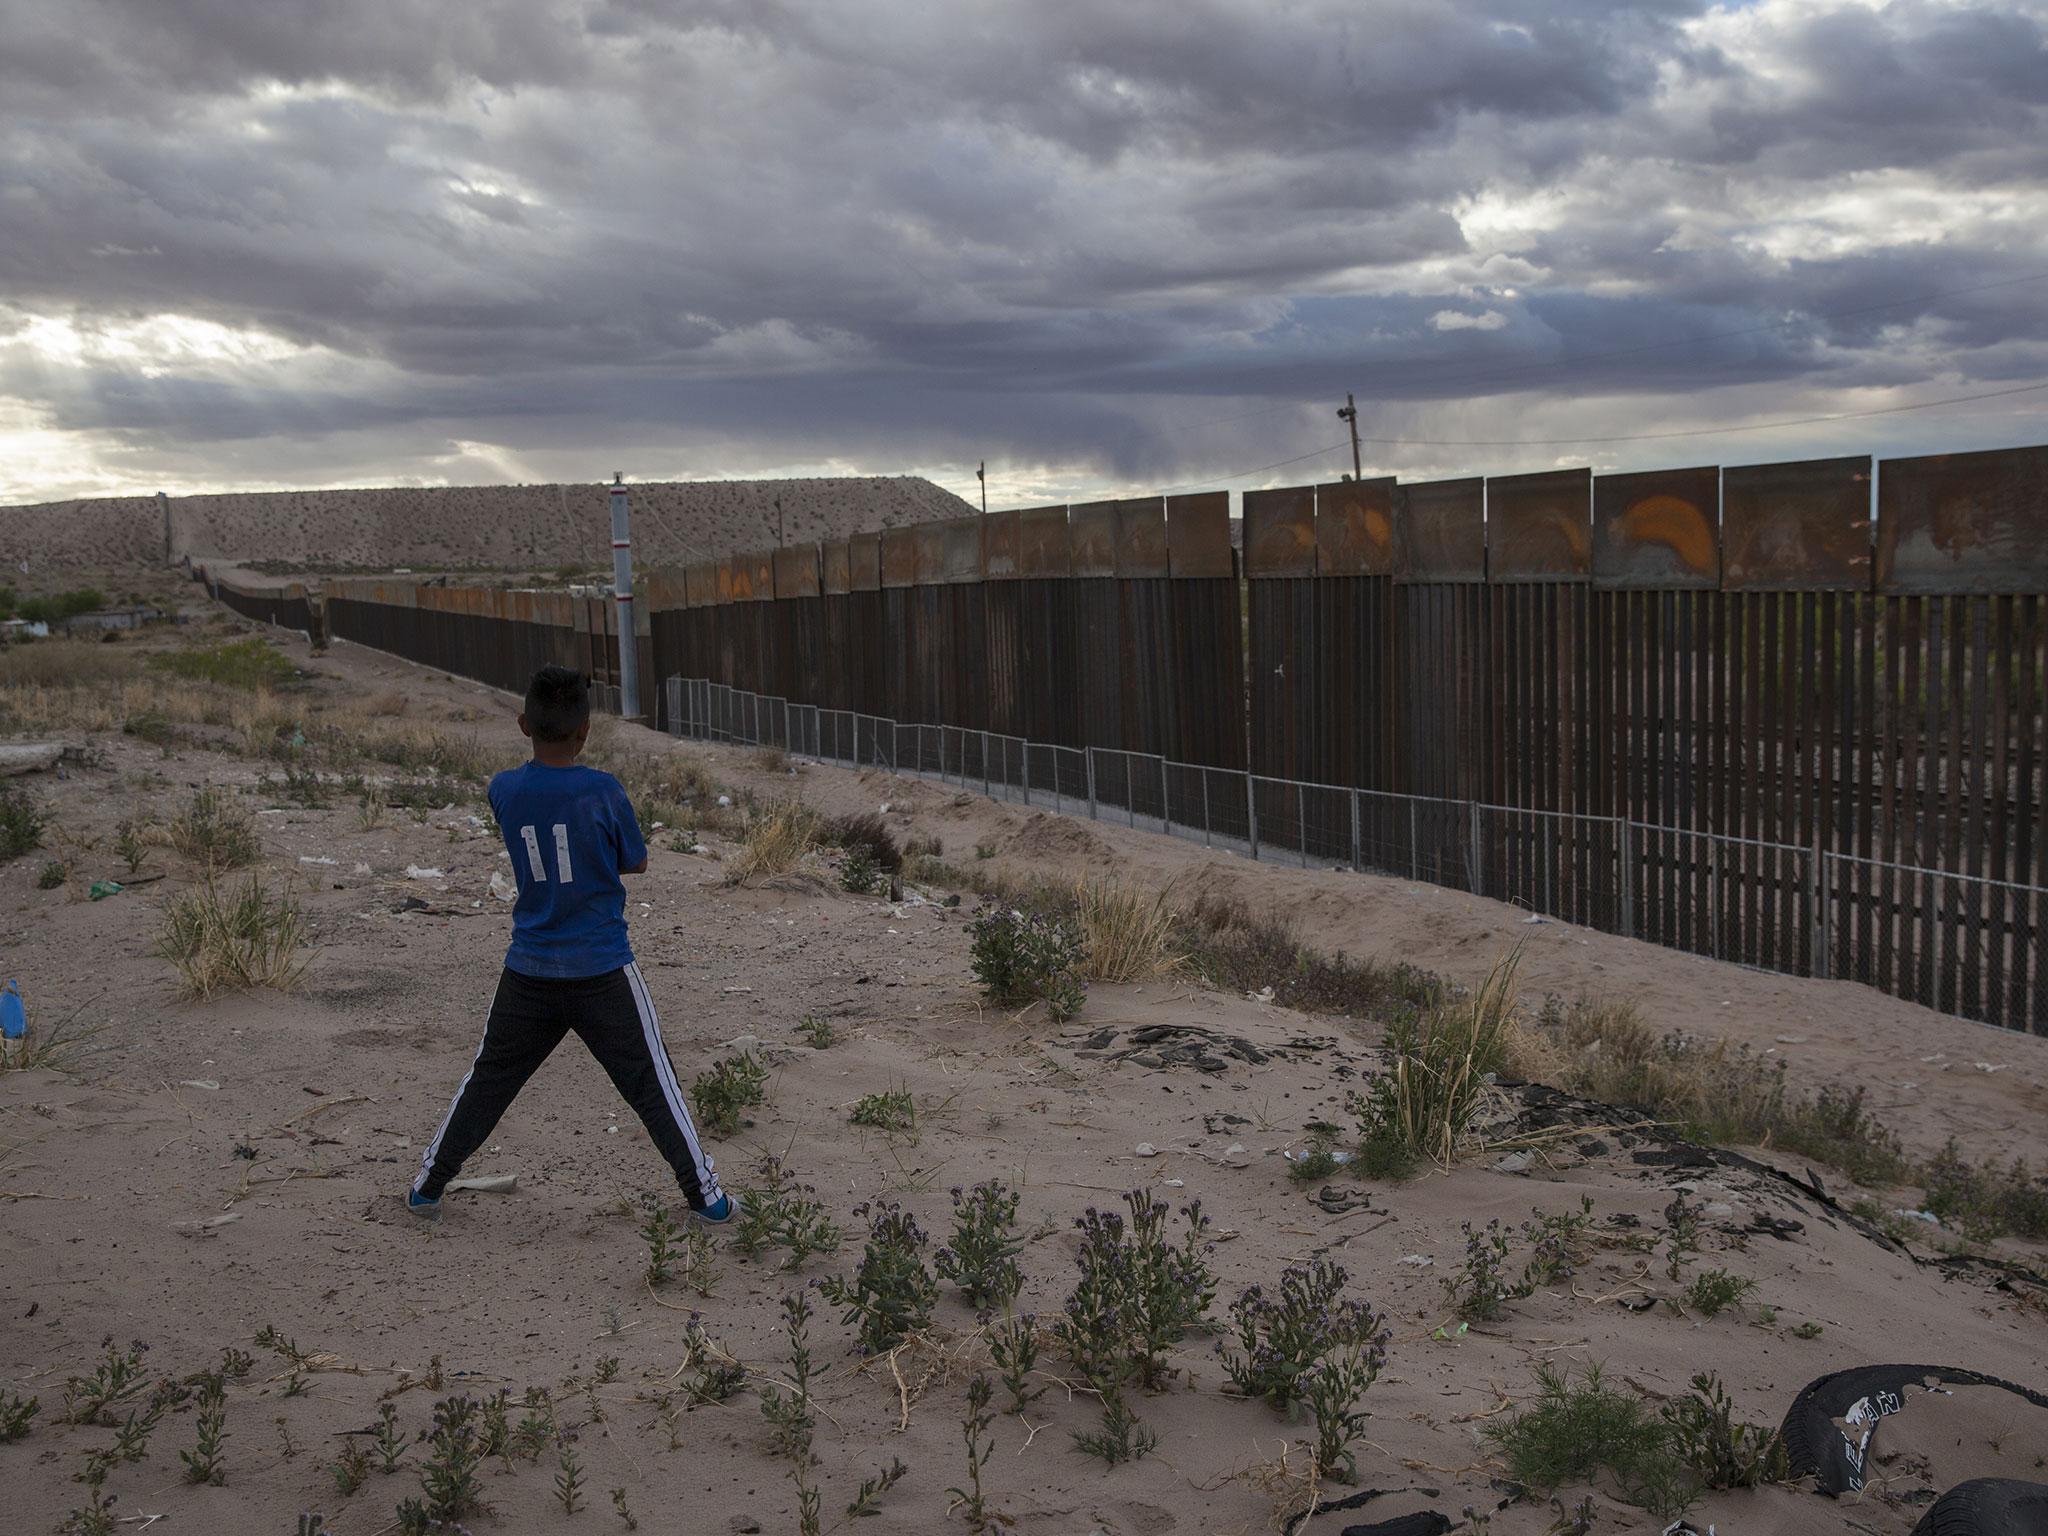 Donald Trump focused on the constant flow of migrants from the start of his campaign, when he denounced border crossers as criminals and rapists, and repeatedly promised to build 'big, beautiful wall' on the border